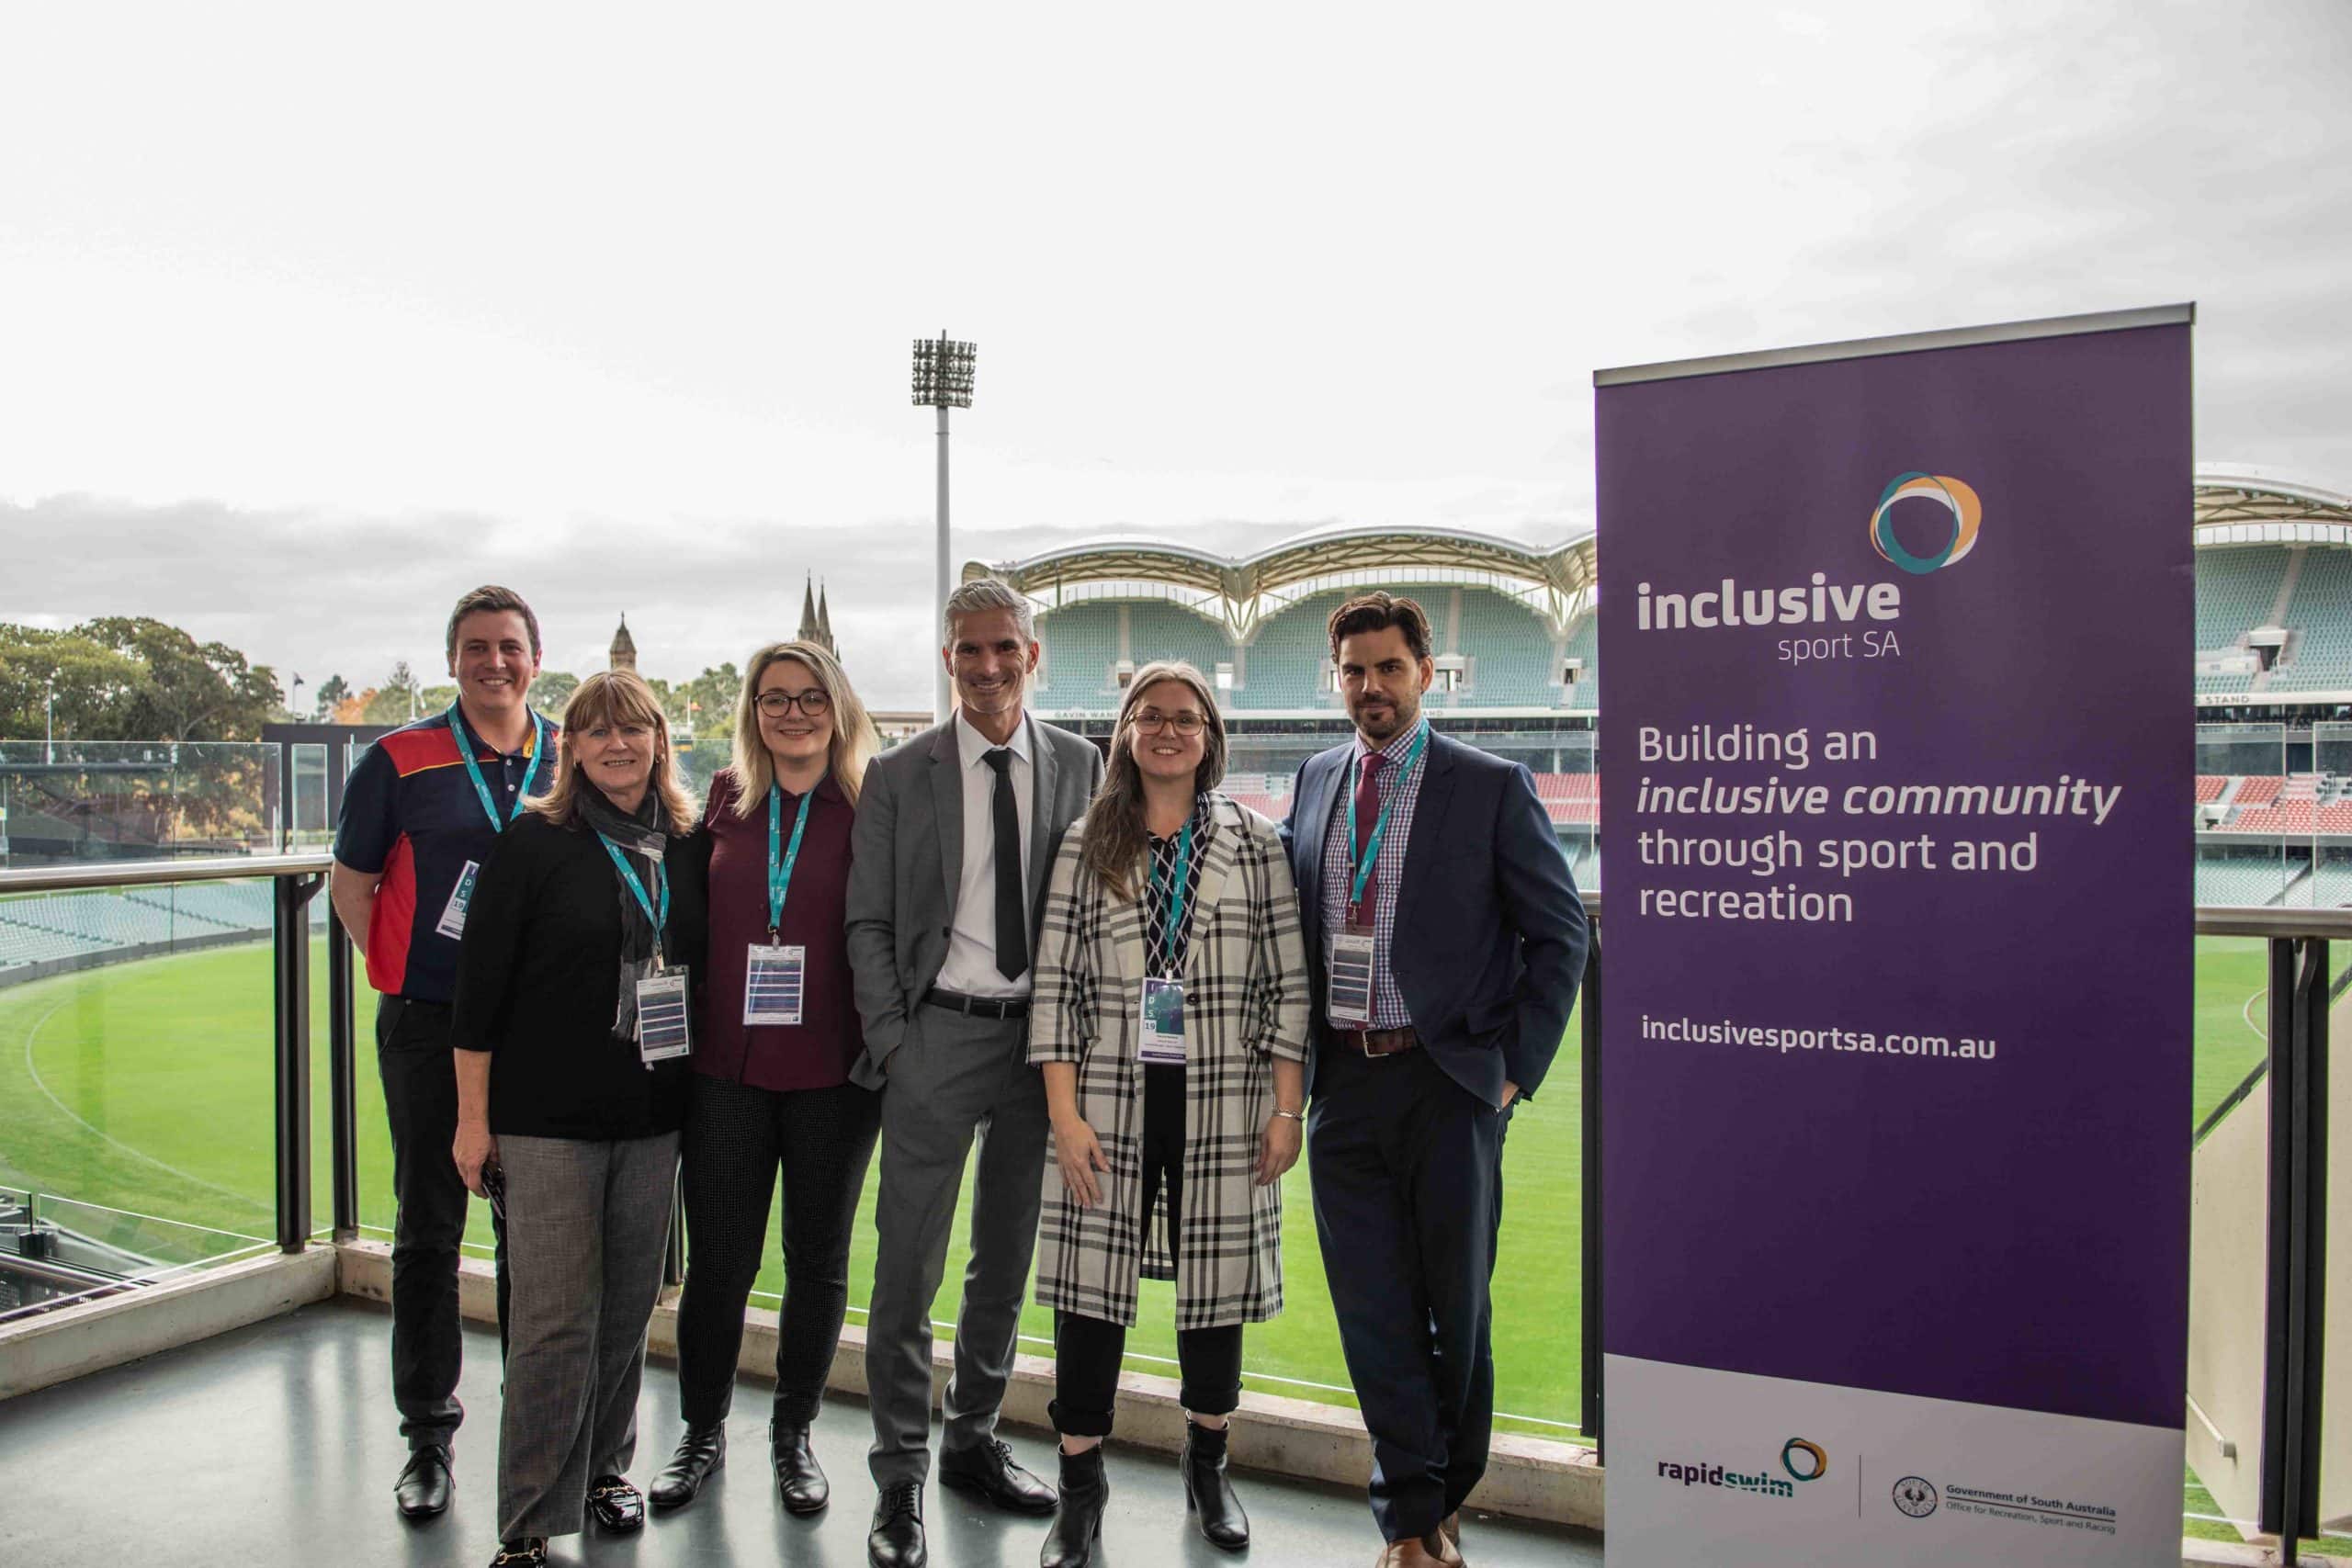 Group of six Active inclusion staff and collaborators standing on balcony with Adelaide Oval in the background.